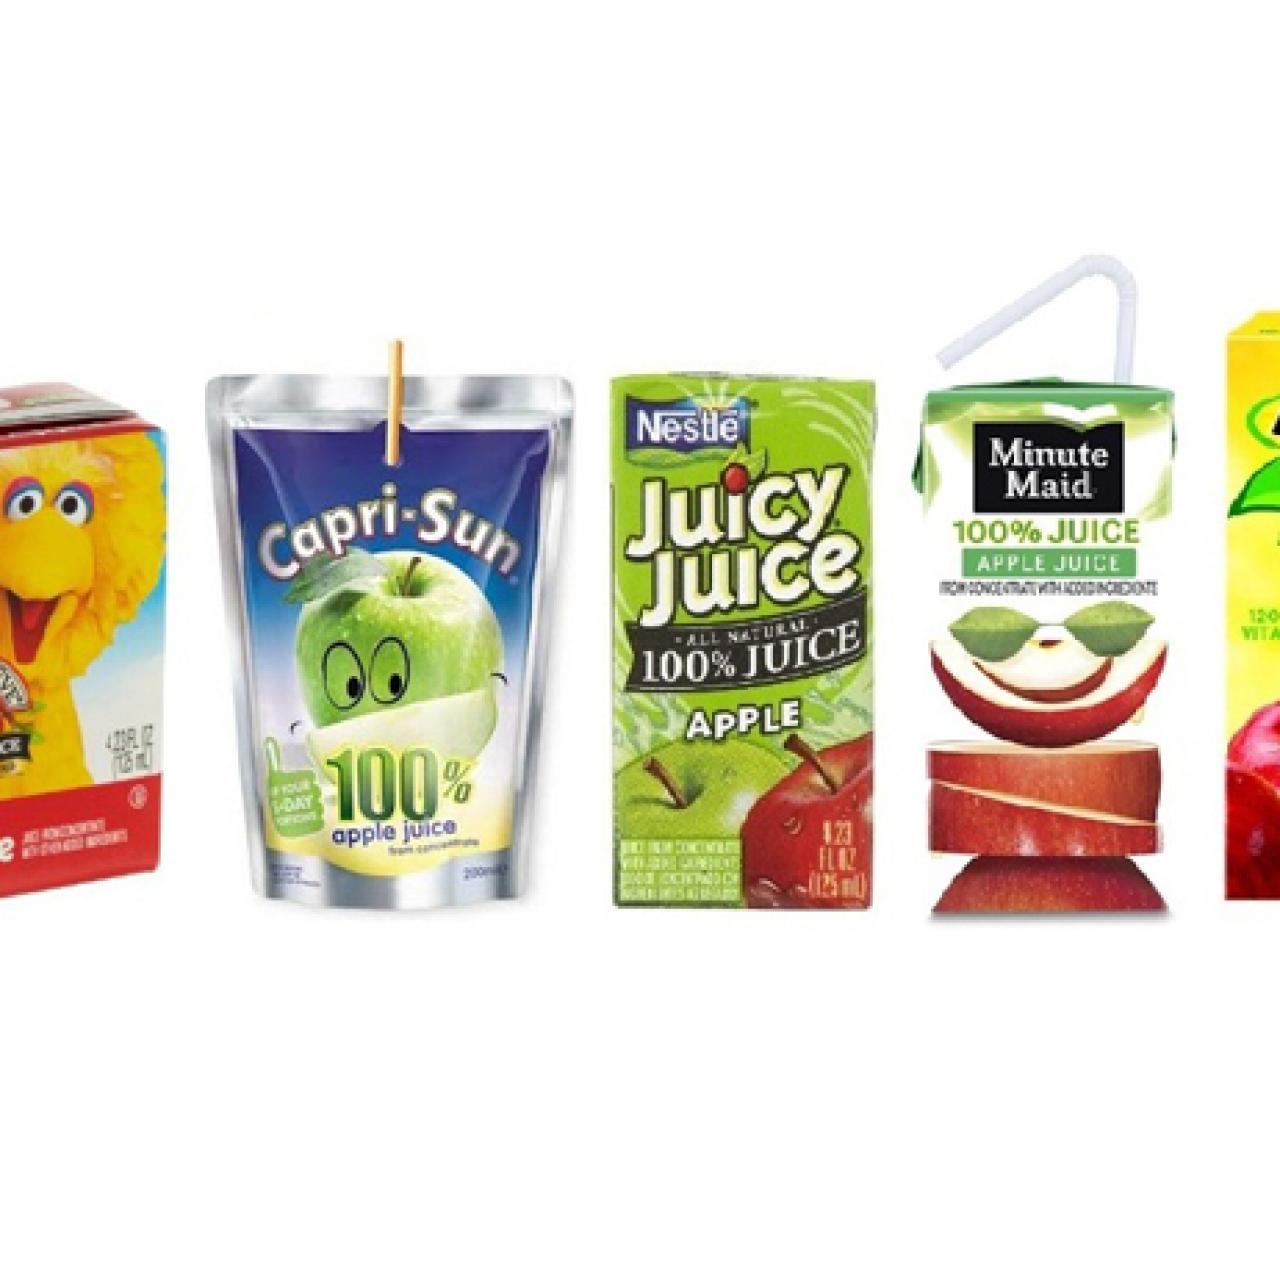 Differences Between Natural Whole Fruit and Natural Fruit Juice